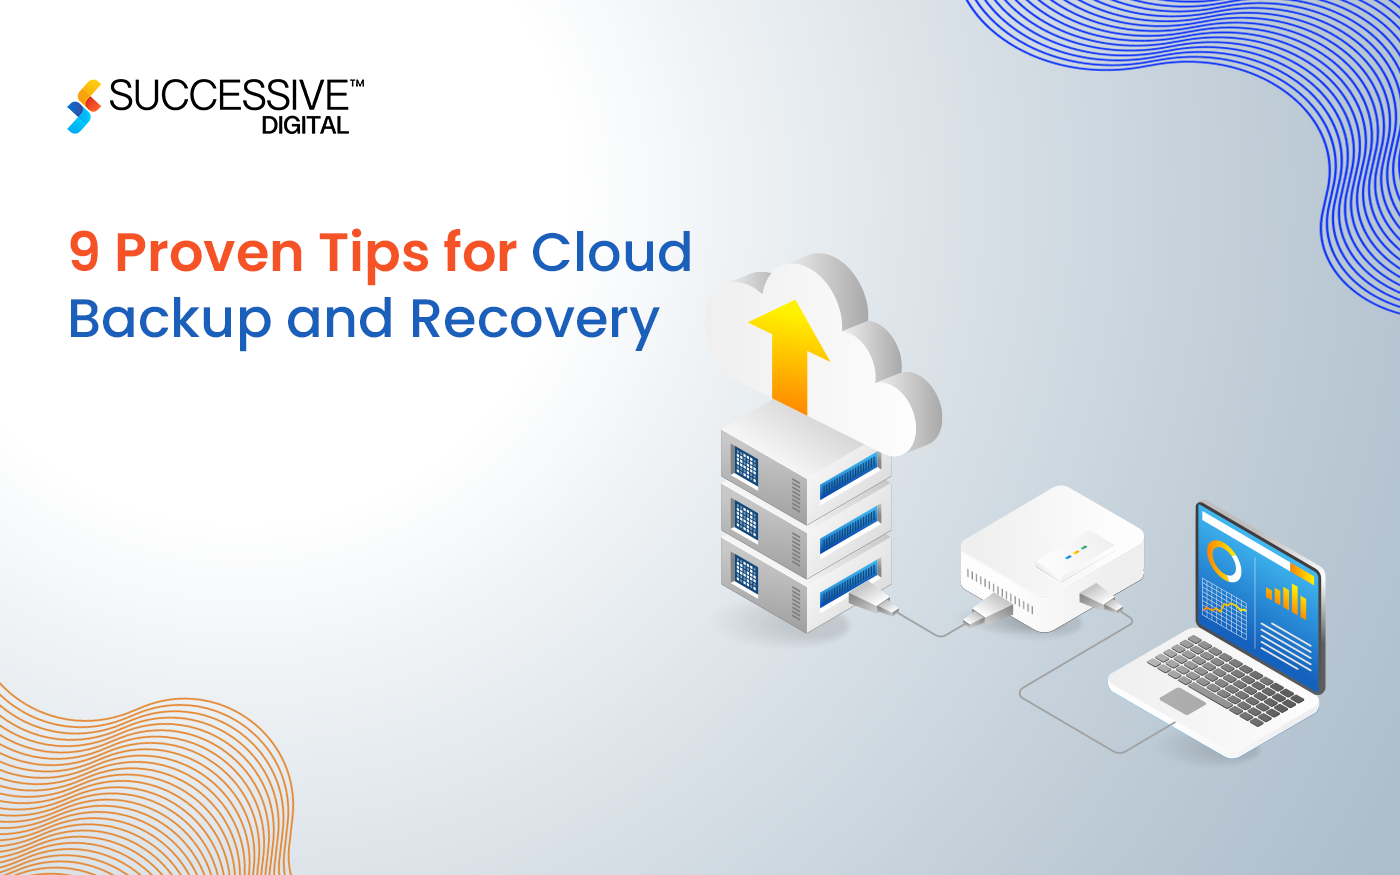 9 Proven Tips for Cloud Backup and Recovery